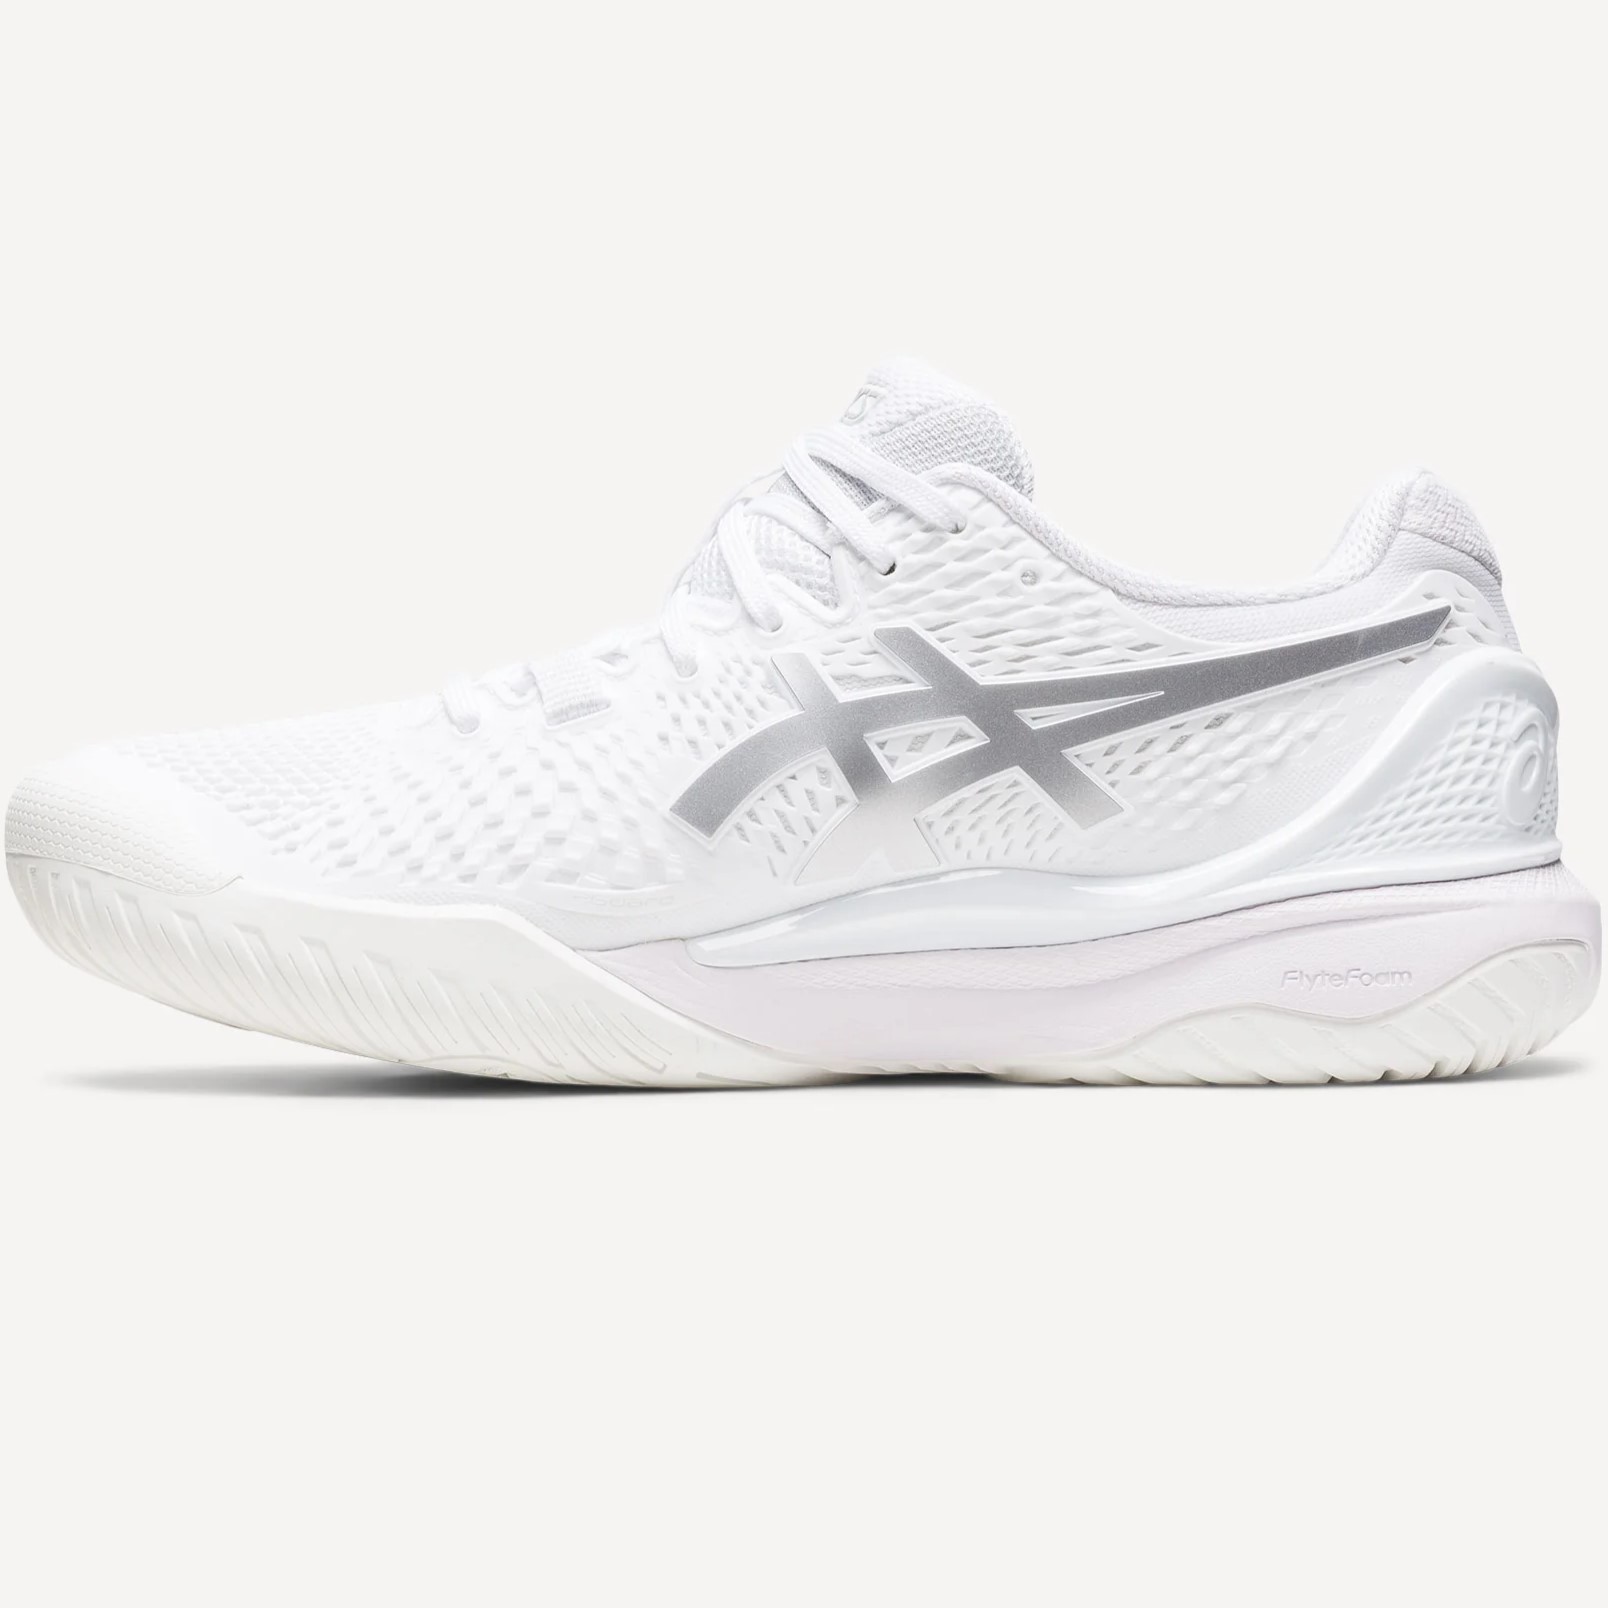 GIÀY ASICS NỮ GEL-RESOLUTION 9 WOMENS TENNIS SHOES WHITE PURE SILVER 1042A208-100 4